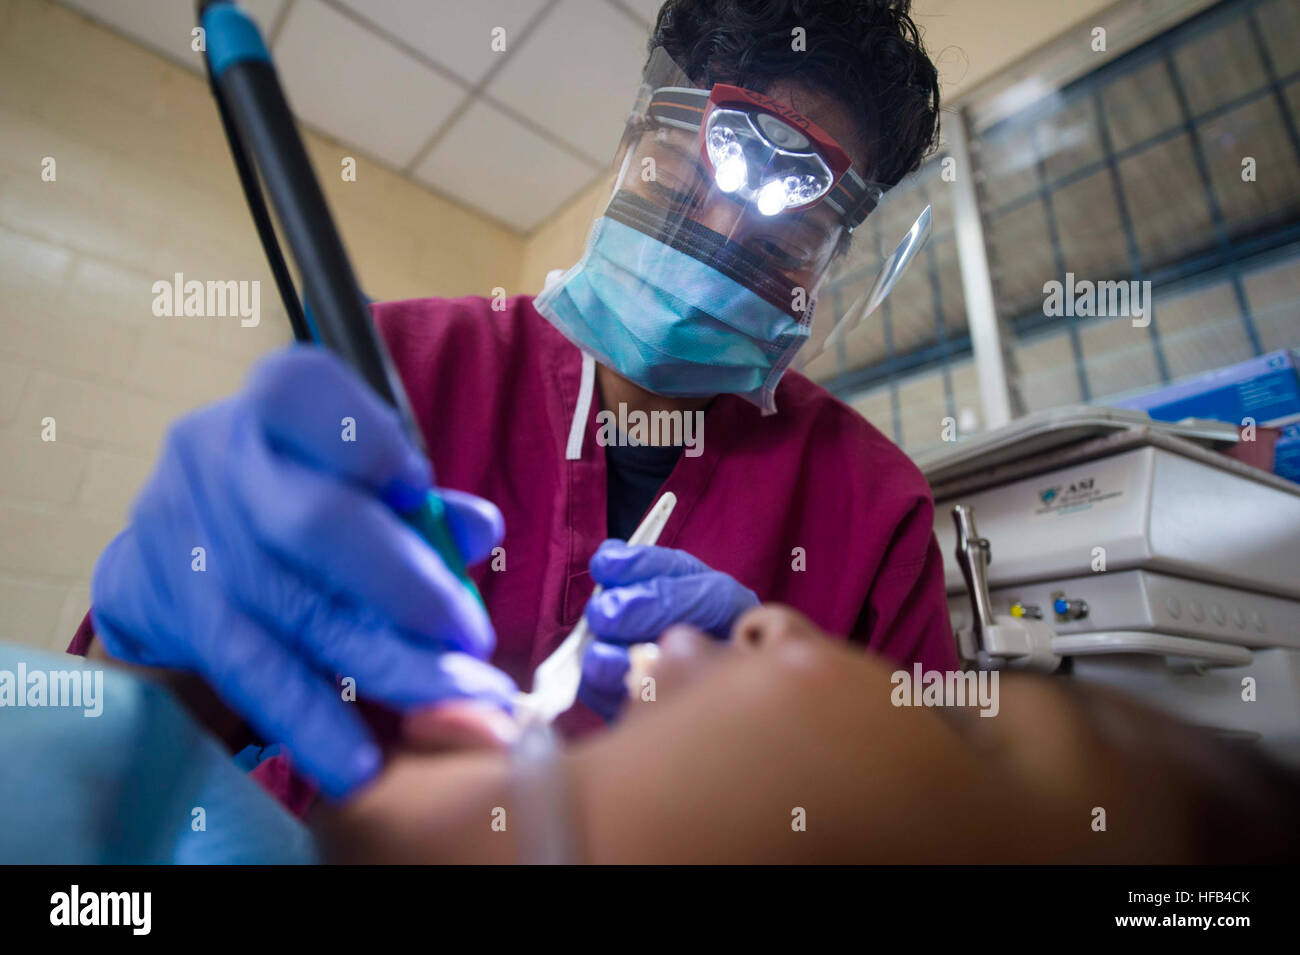 150521-N-XQ474-147 PUERTO CABEZAS, Nicaragua (May 21, 2015) Chief Hospital Corpsman Janae Smart, a native of Norfolk, Va., assigned to Naval Air Station Oceana Branch Health Clinic, Virginia Beach, Va., performs a dental cleaning on a patient at a medical site established at the Instituto Politechnico Heroes y Martires during Continuing Promise 2015. Continuing Promise is a U.S. Southern Command-sponsored and U.S. Naval Forces Southern Command/U.S. 4th Fleet-conducted deployment to conduct civil-military operations including humanitarian-civil assistance, subject matter expert exchanges, medic Stock Photo